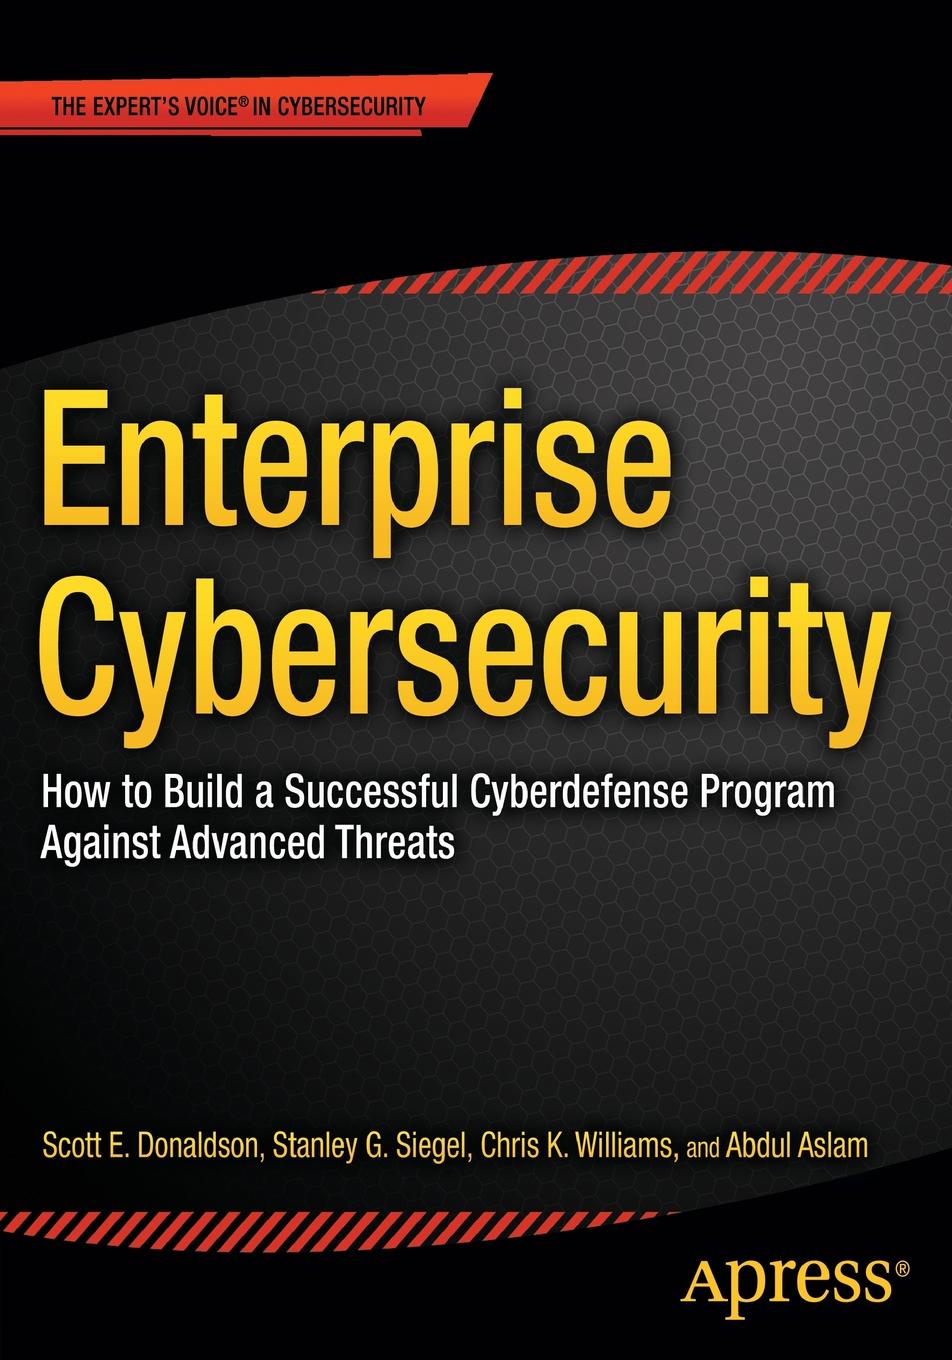 Enterprise Cybersecurity. How to Build a Successful Cyberdefense Program against Advanced Threats